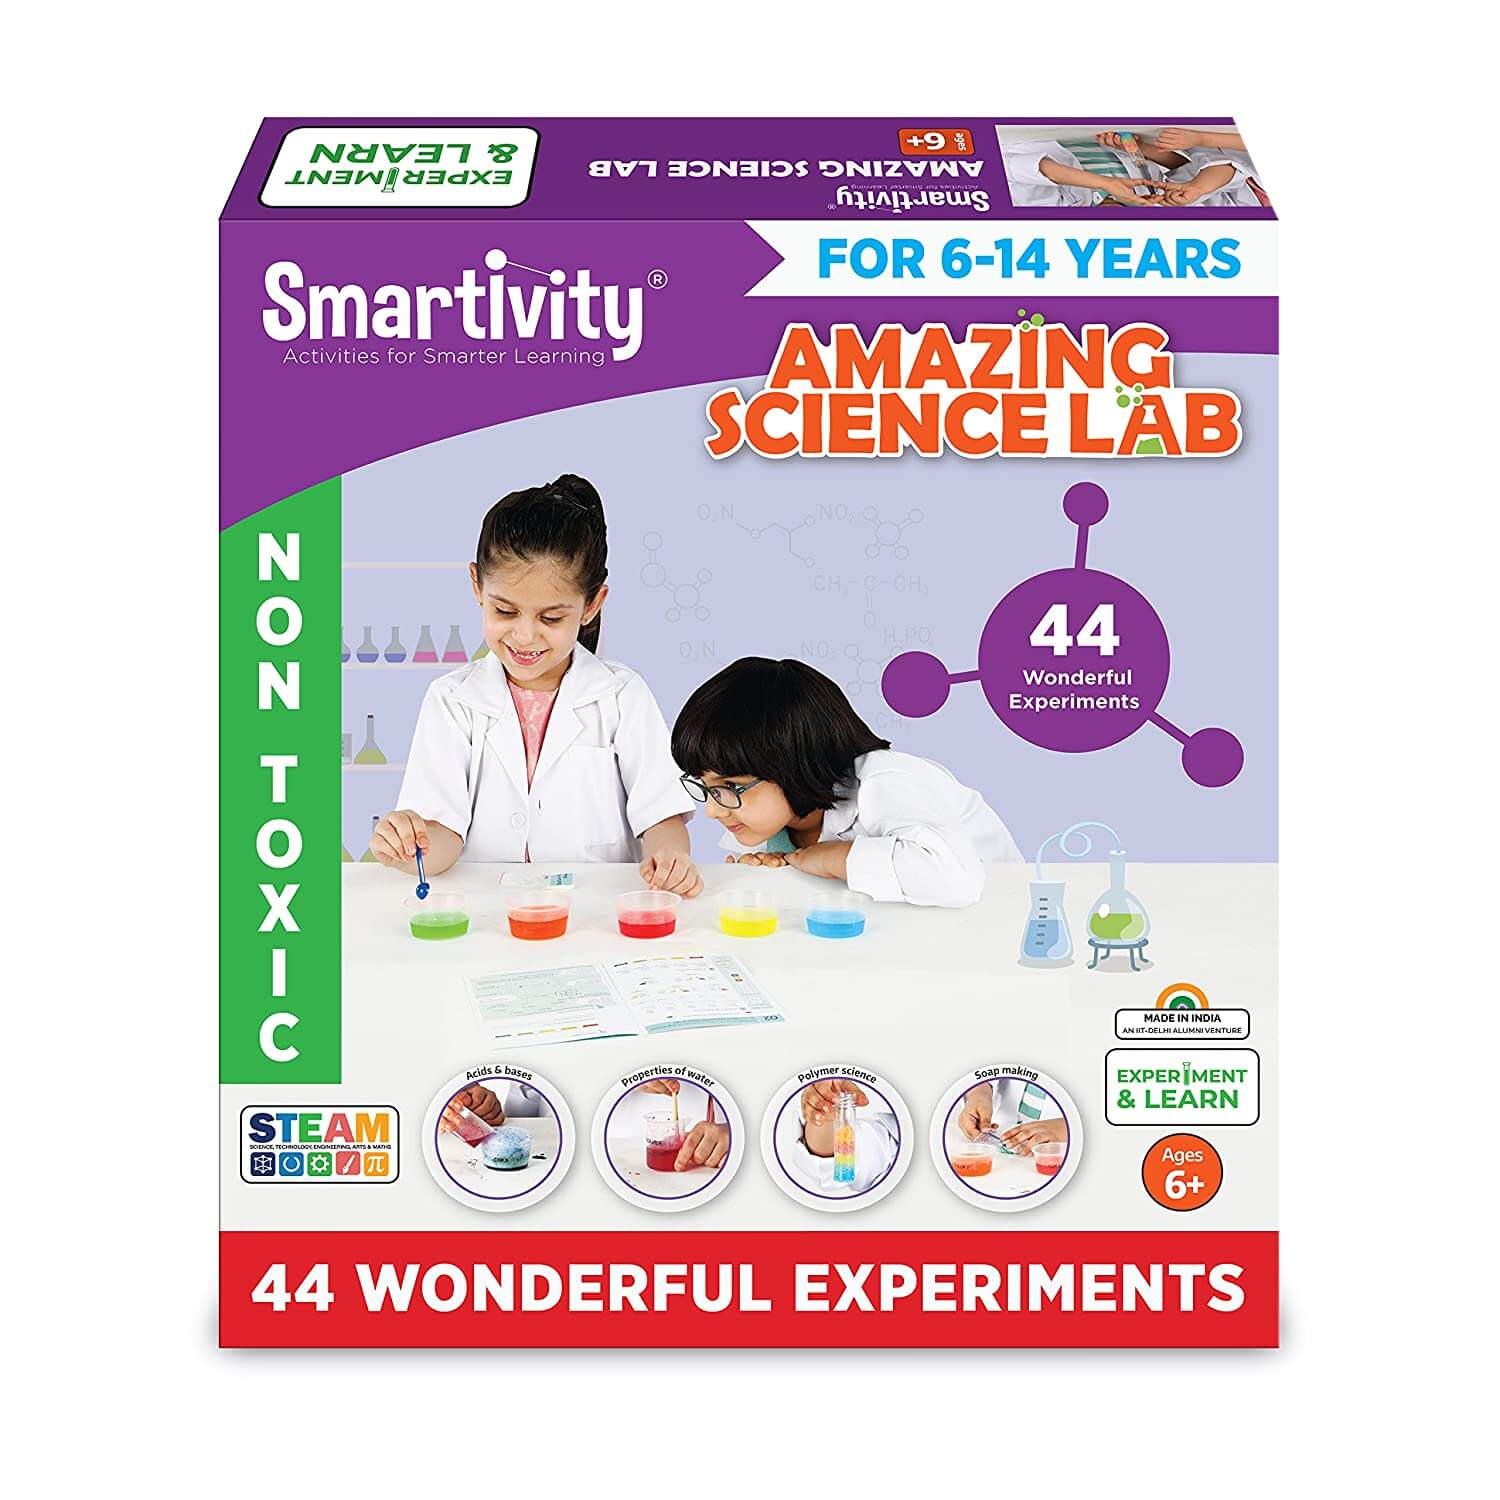 Smartivity Glow Magic Science Experiment Kit for Kids 6 - 14